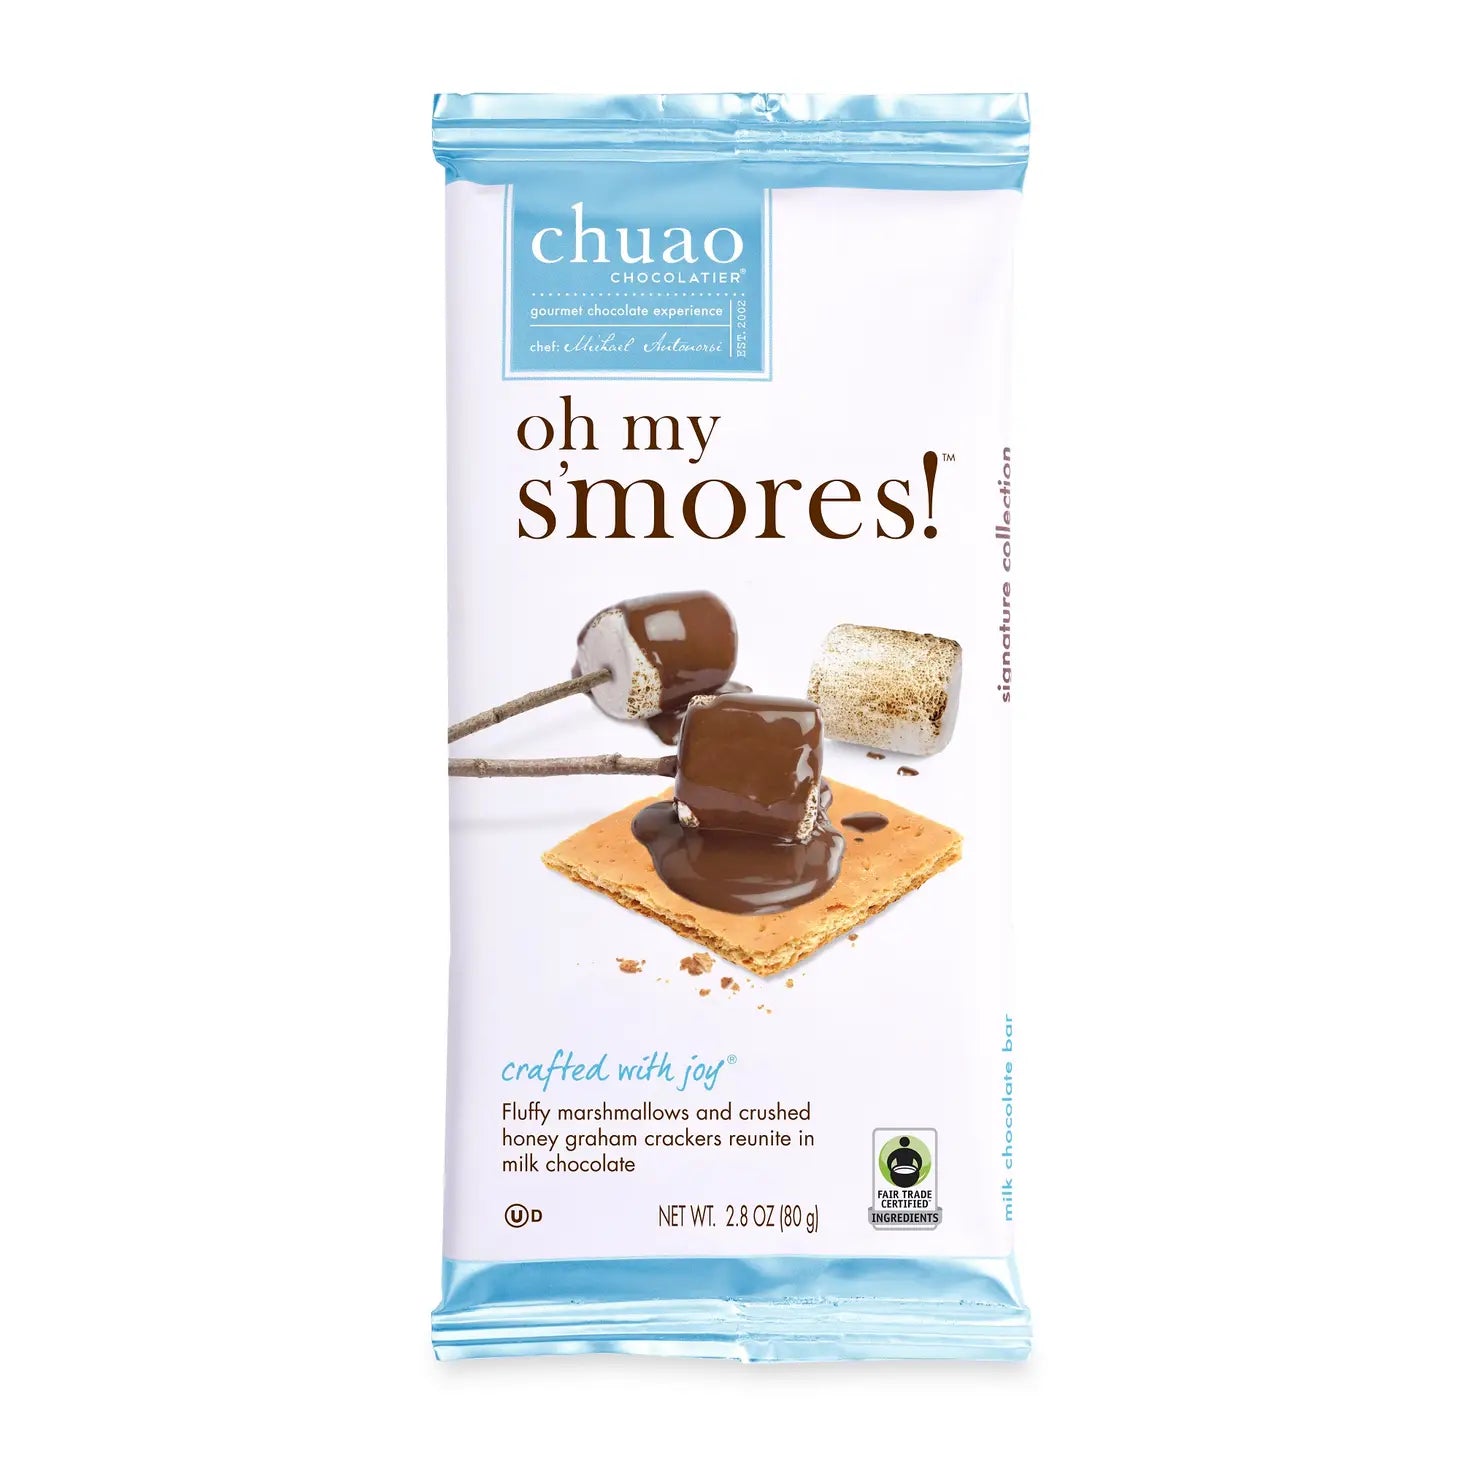 Oh My S'mores!- Signature Chocolate Bar